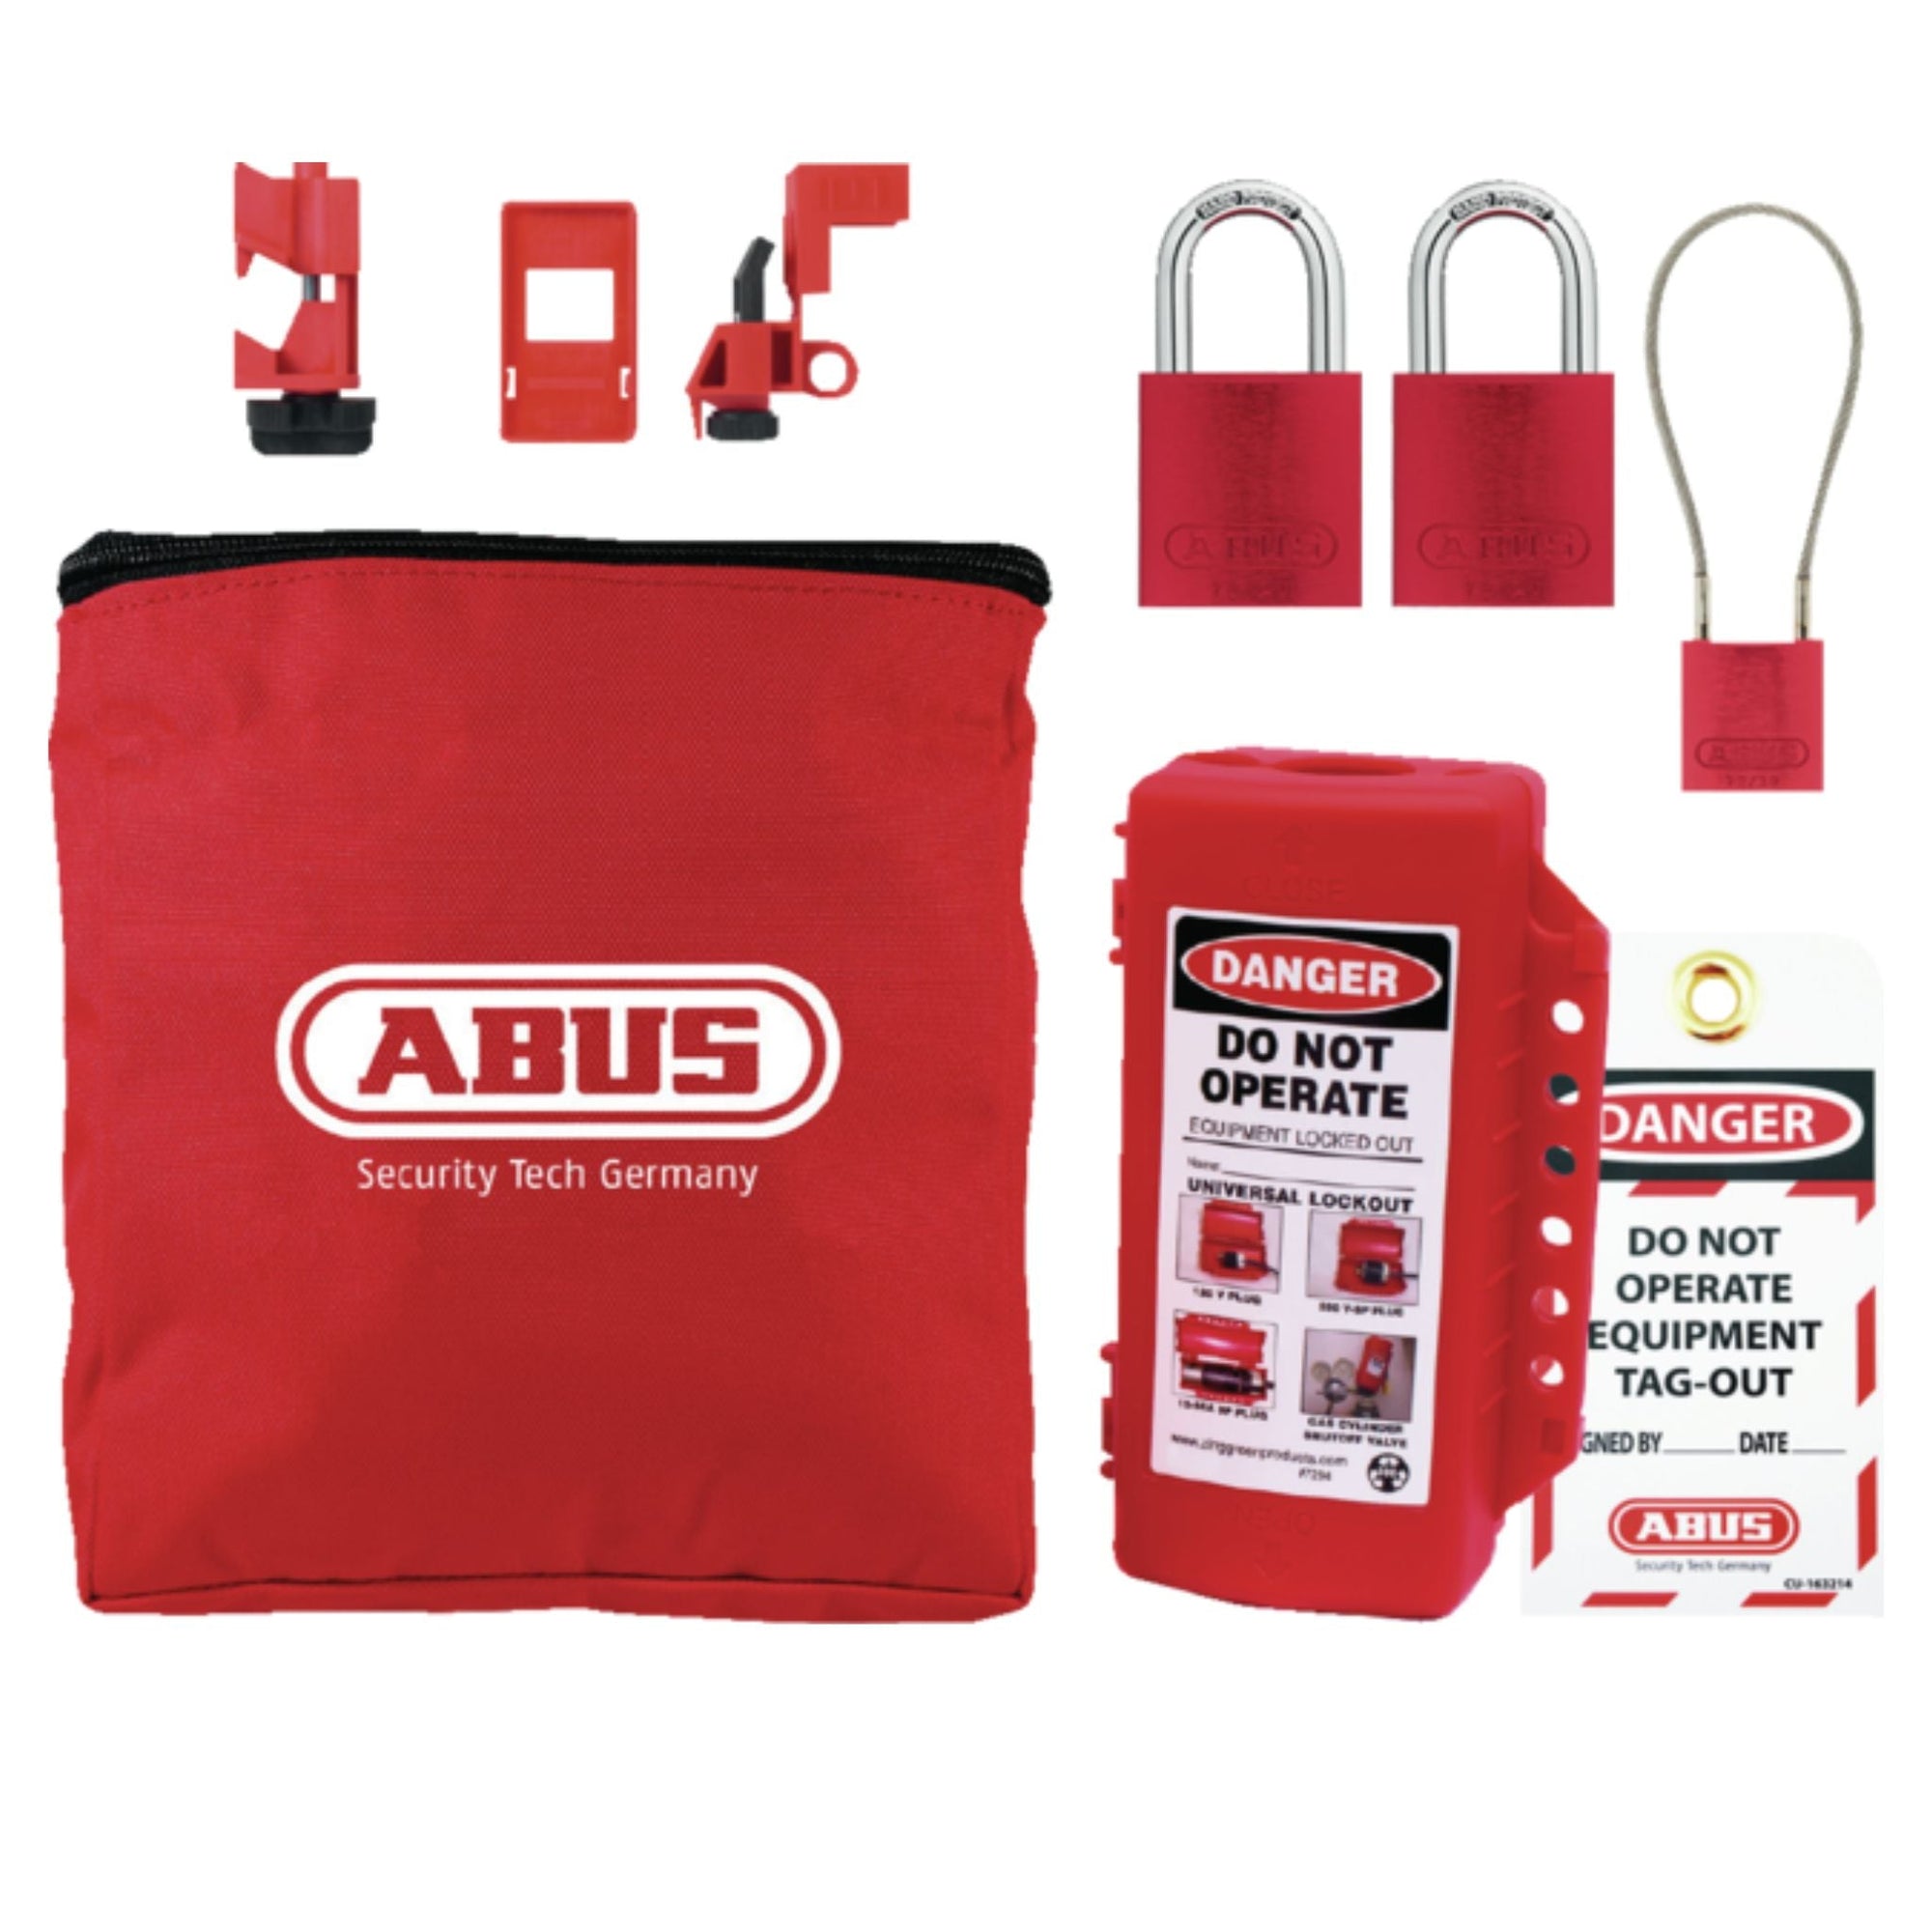 Abus K905 (97174) Standard Pouch Kit Stores and Organizes Lockout Devices In One Location with Large Pouch - The Lock Source